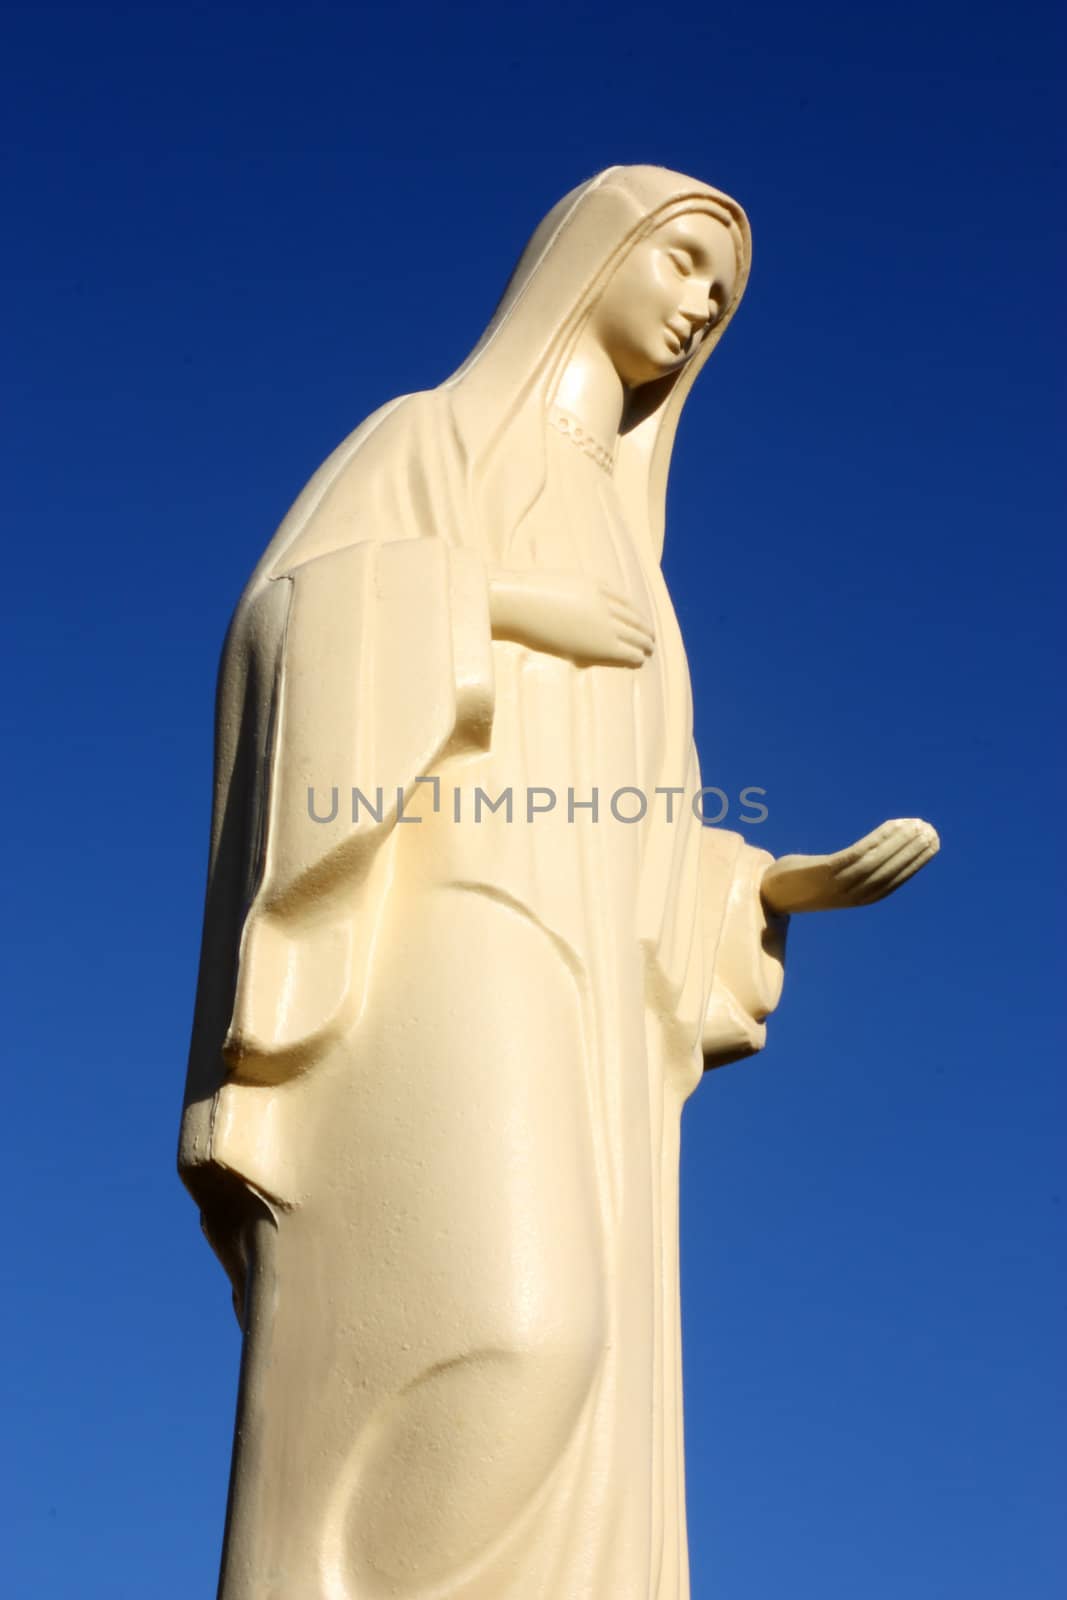 Statue of the Blessed Virgin Mary in front of the sky